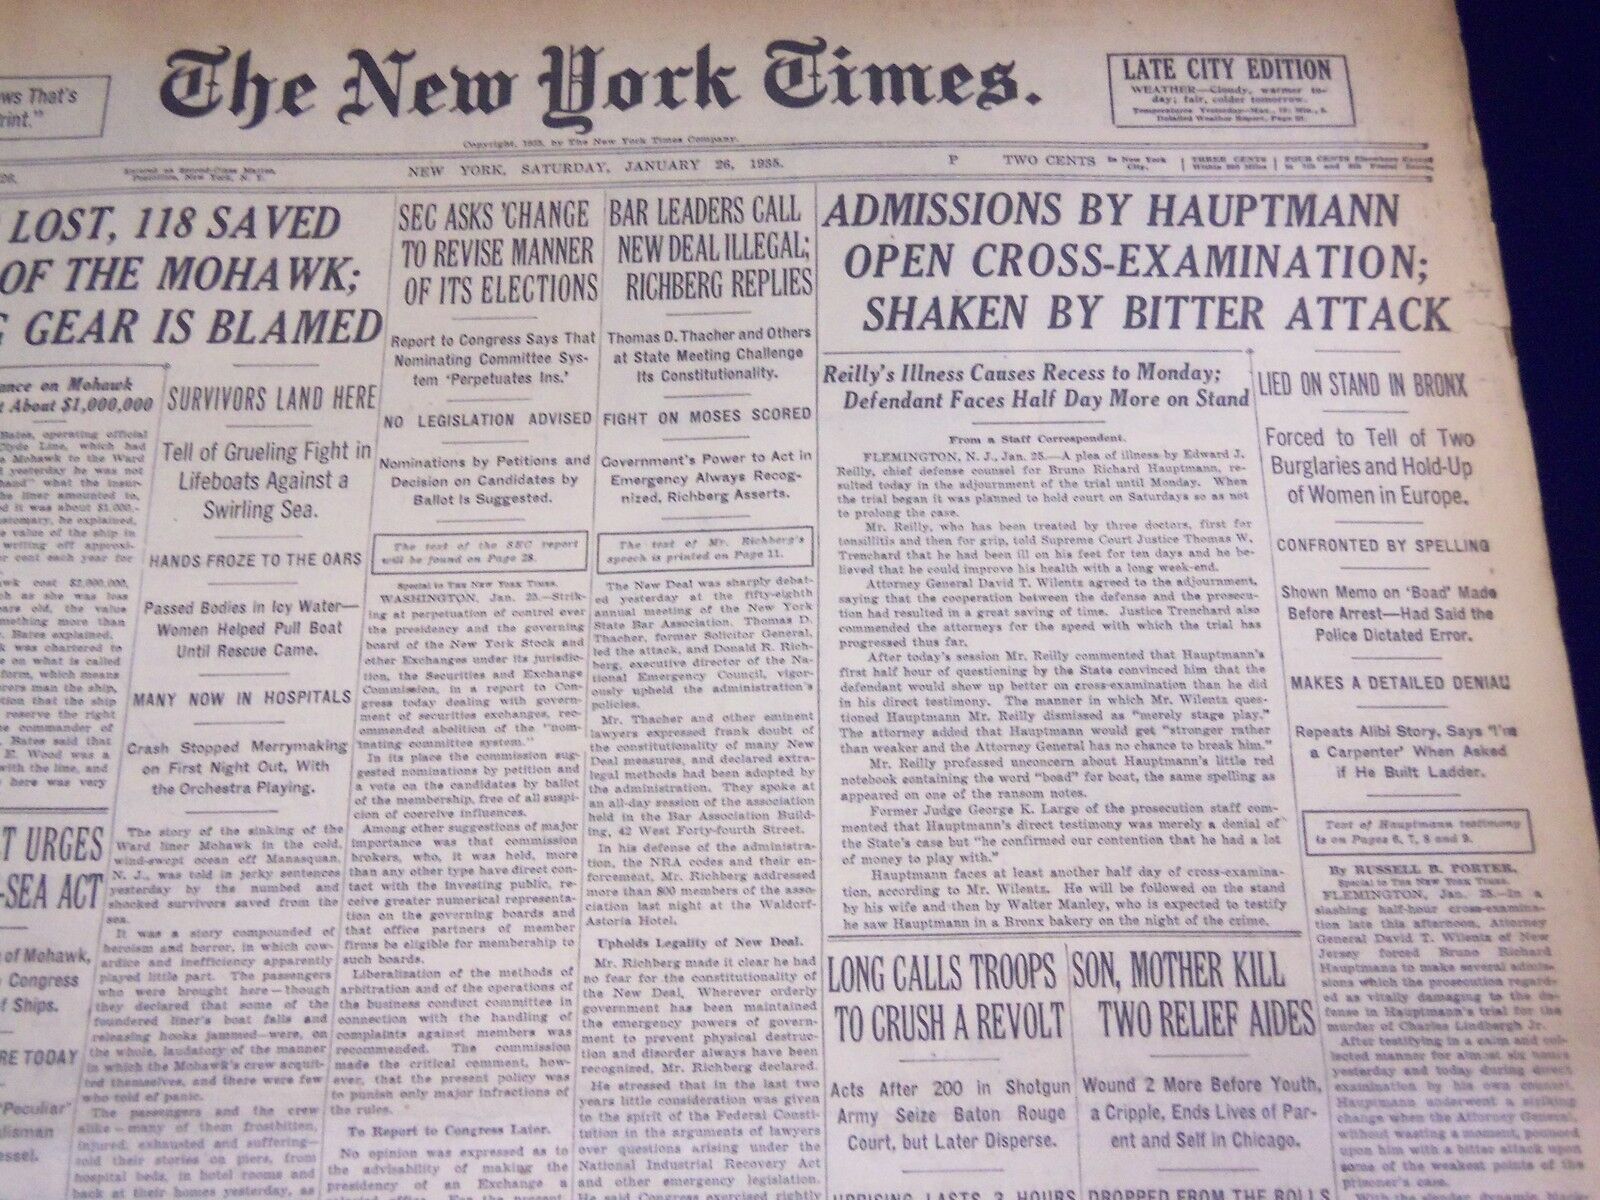 1935 JANUARY 26 NEW YORK TIMES - HAUPTMANN LIED ON STAND IN BRONX - NT 1950